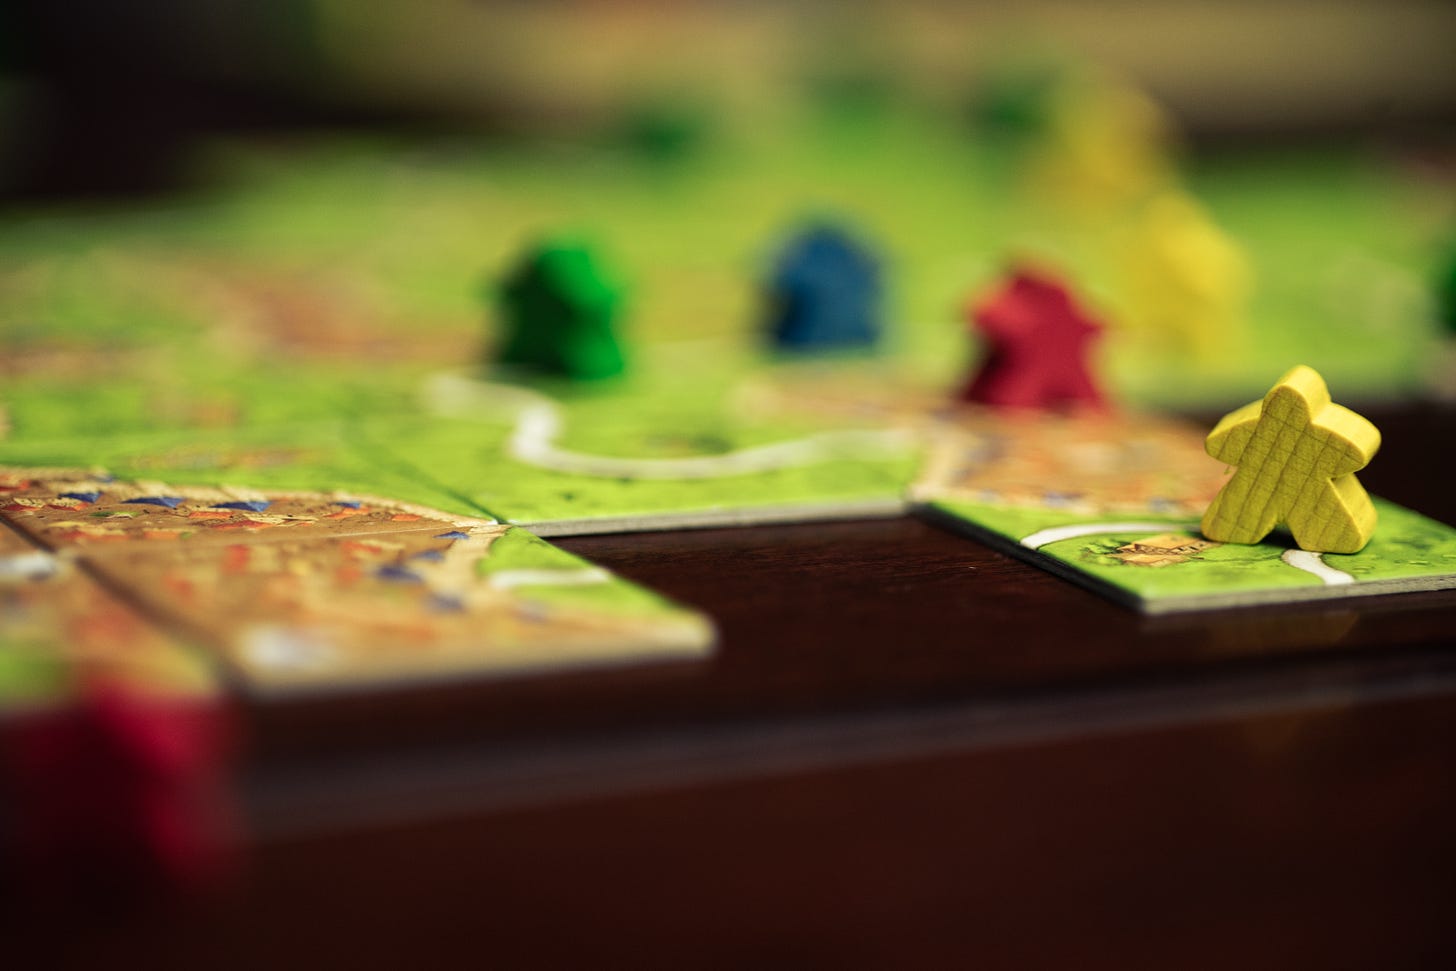 The board game Carcassonne on a table.